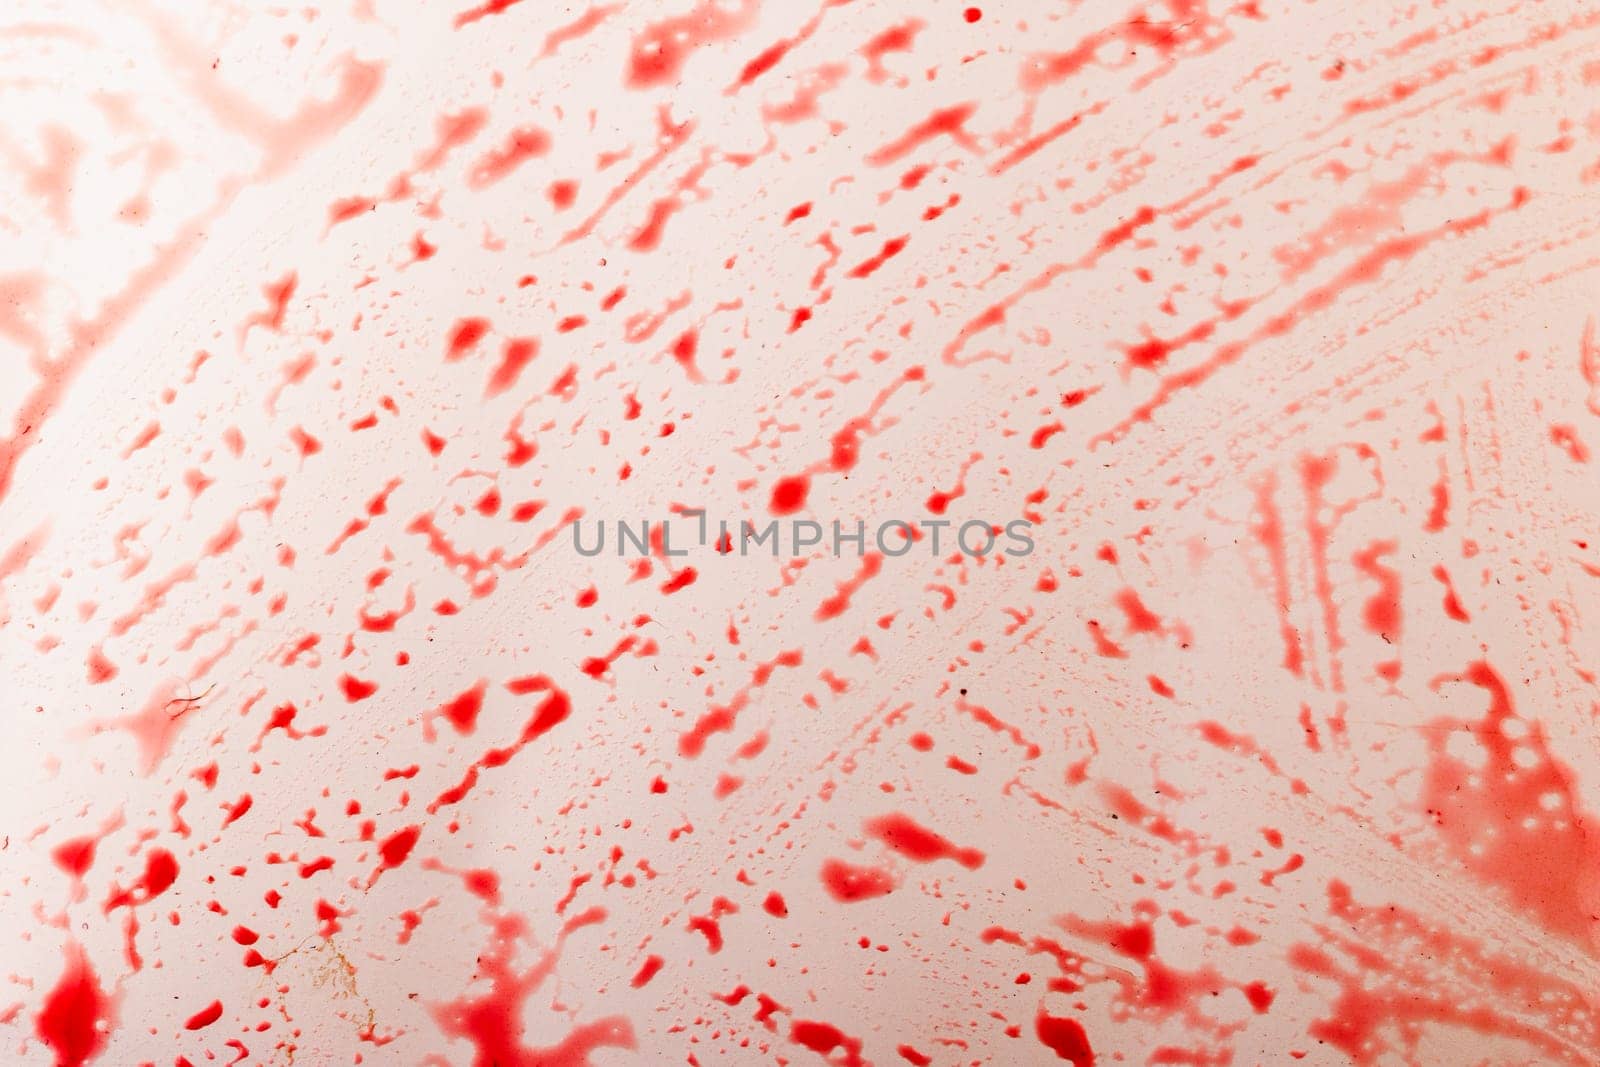 red currant juice on white background looks like a blood splashes.